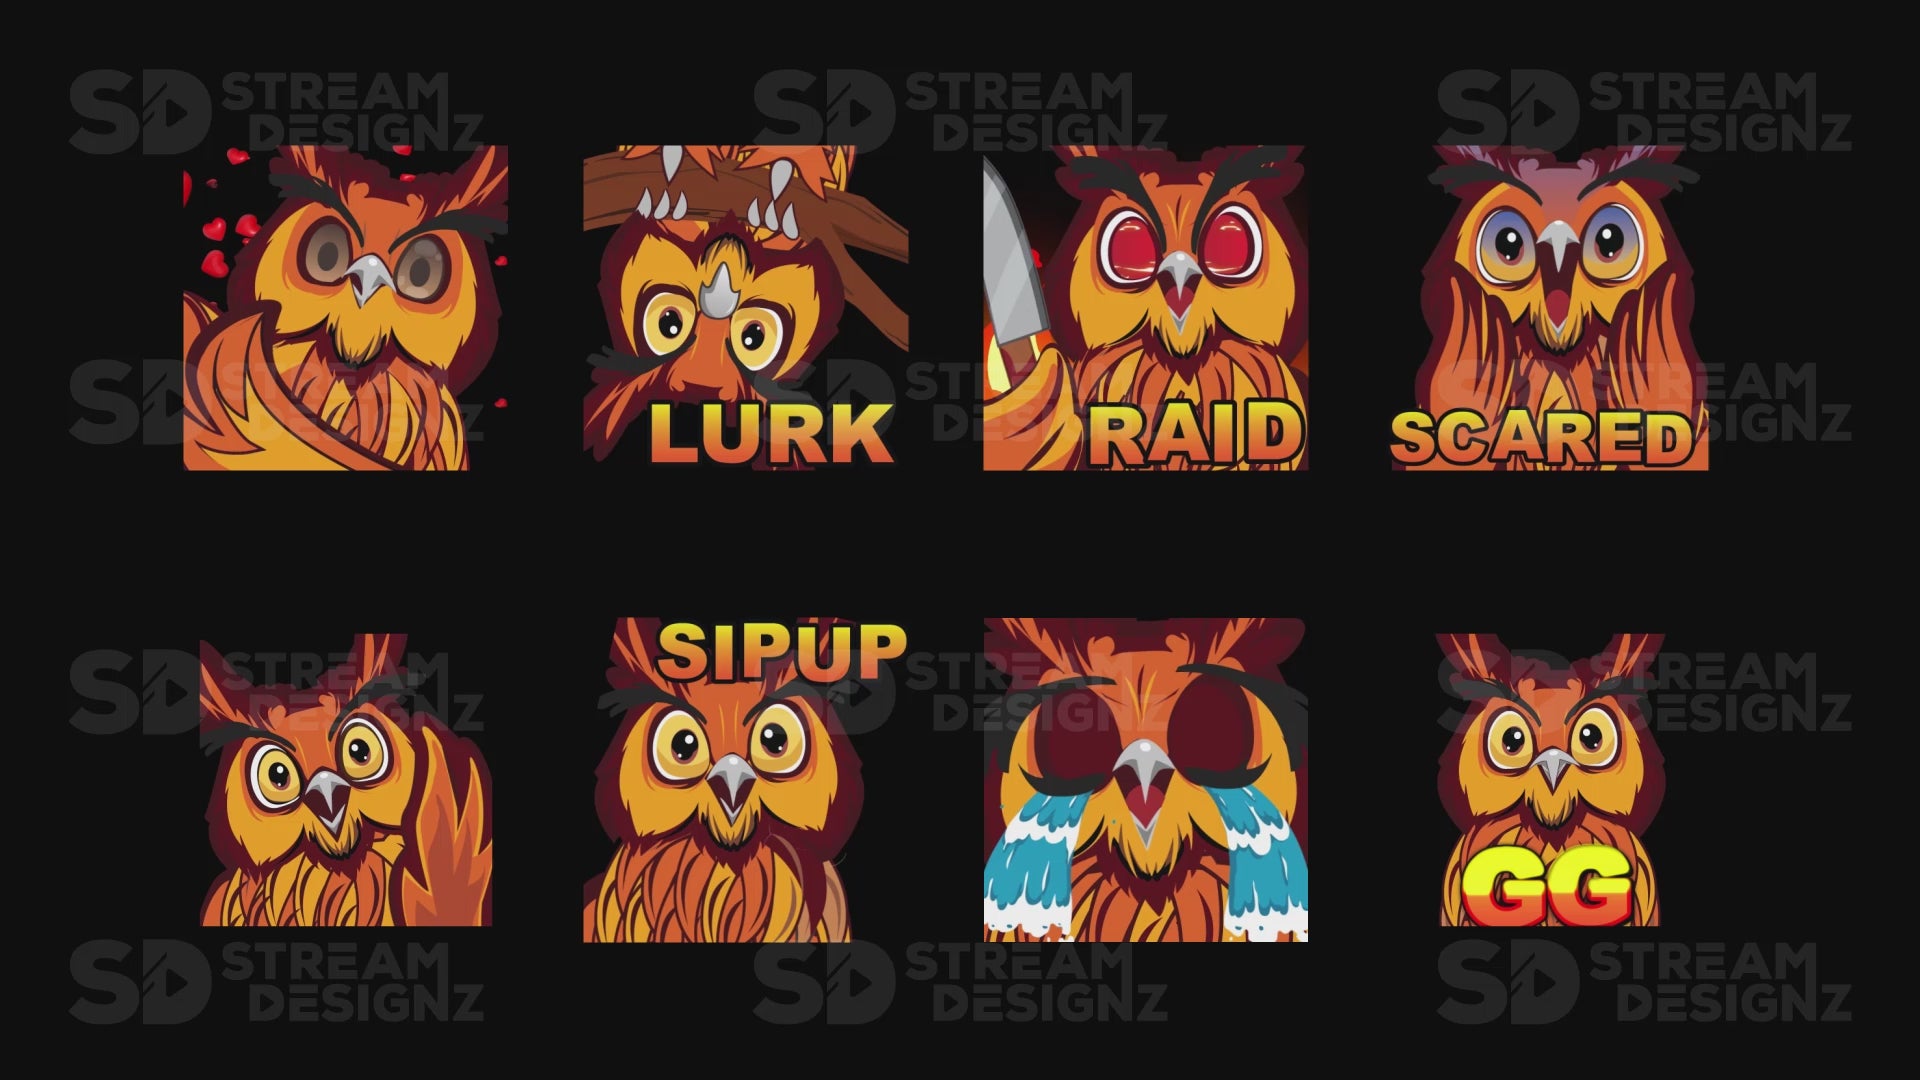 8 Pack Emotes Animated Fall Harvest Preview Video stream designz